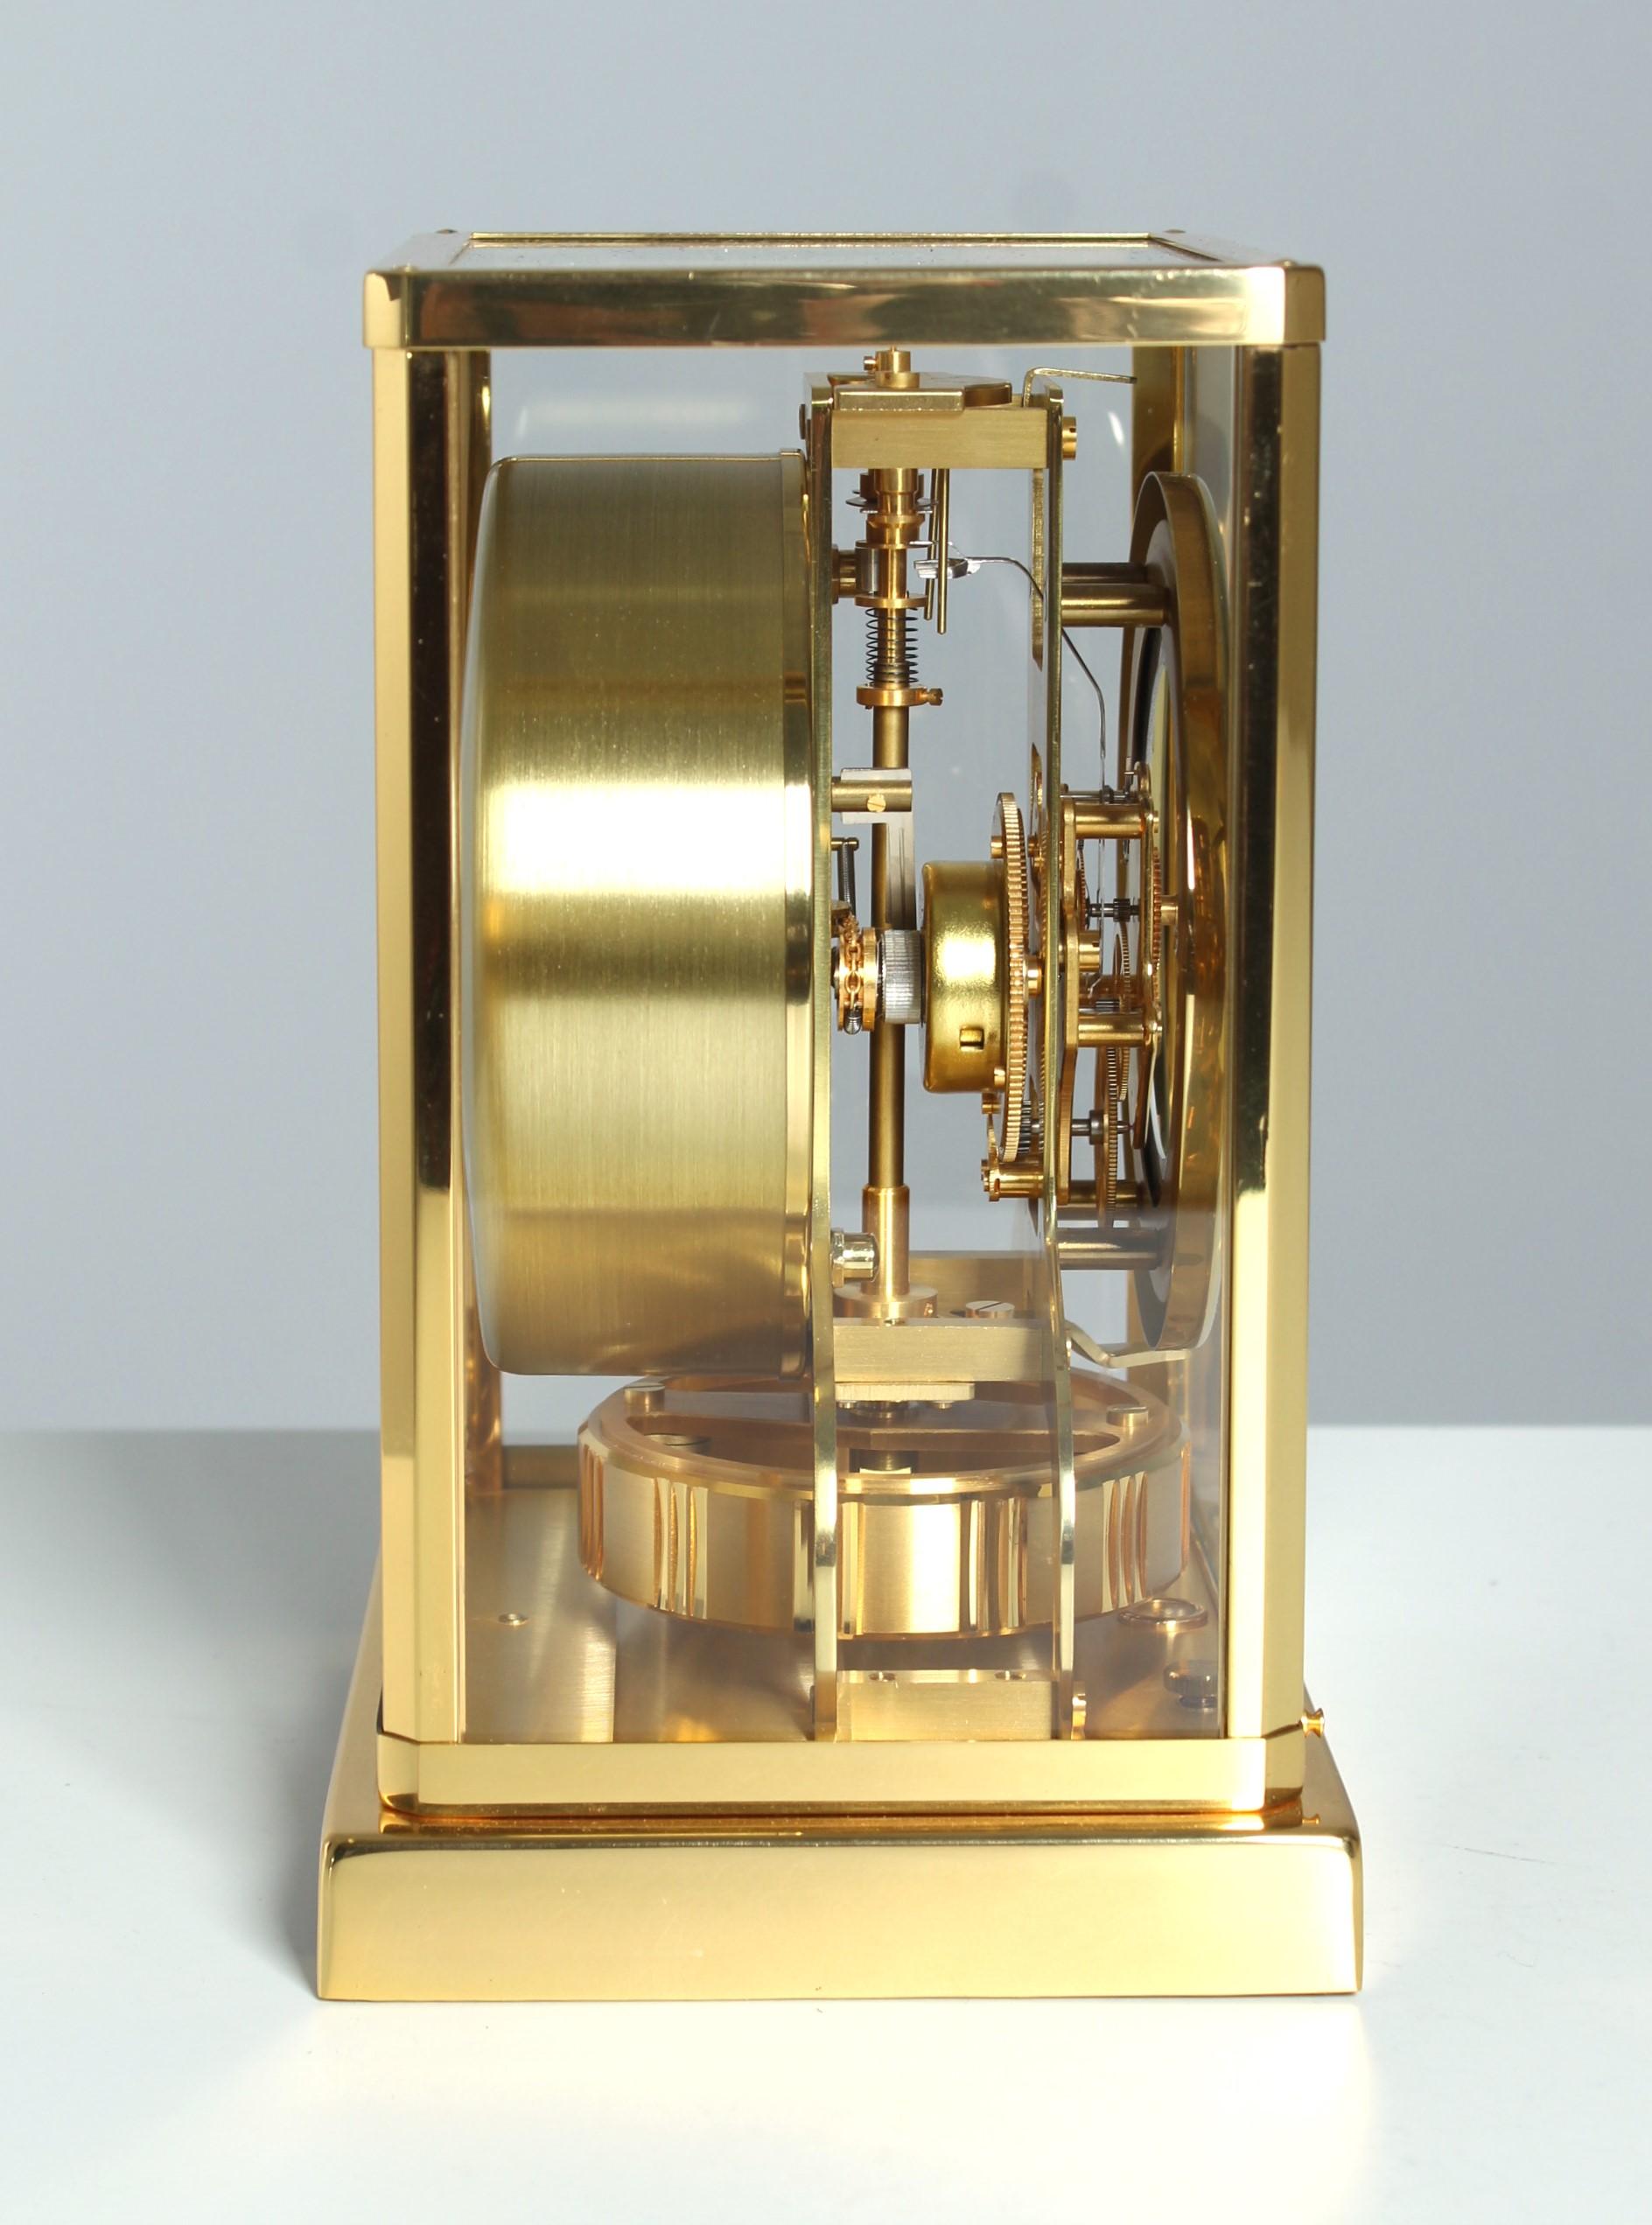 Jaeger LeCoultre Atmos clock in classic design, 1968

Switzerland
Brass
Year of manufacture 1968

Dimensions: H x W x D: 22 x 18 x 13.5 cm

Description:
Offered is a 1968 Atmos in a timeless and classic design. This model was produced under